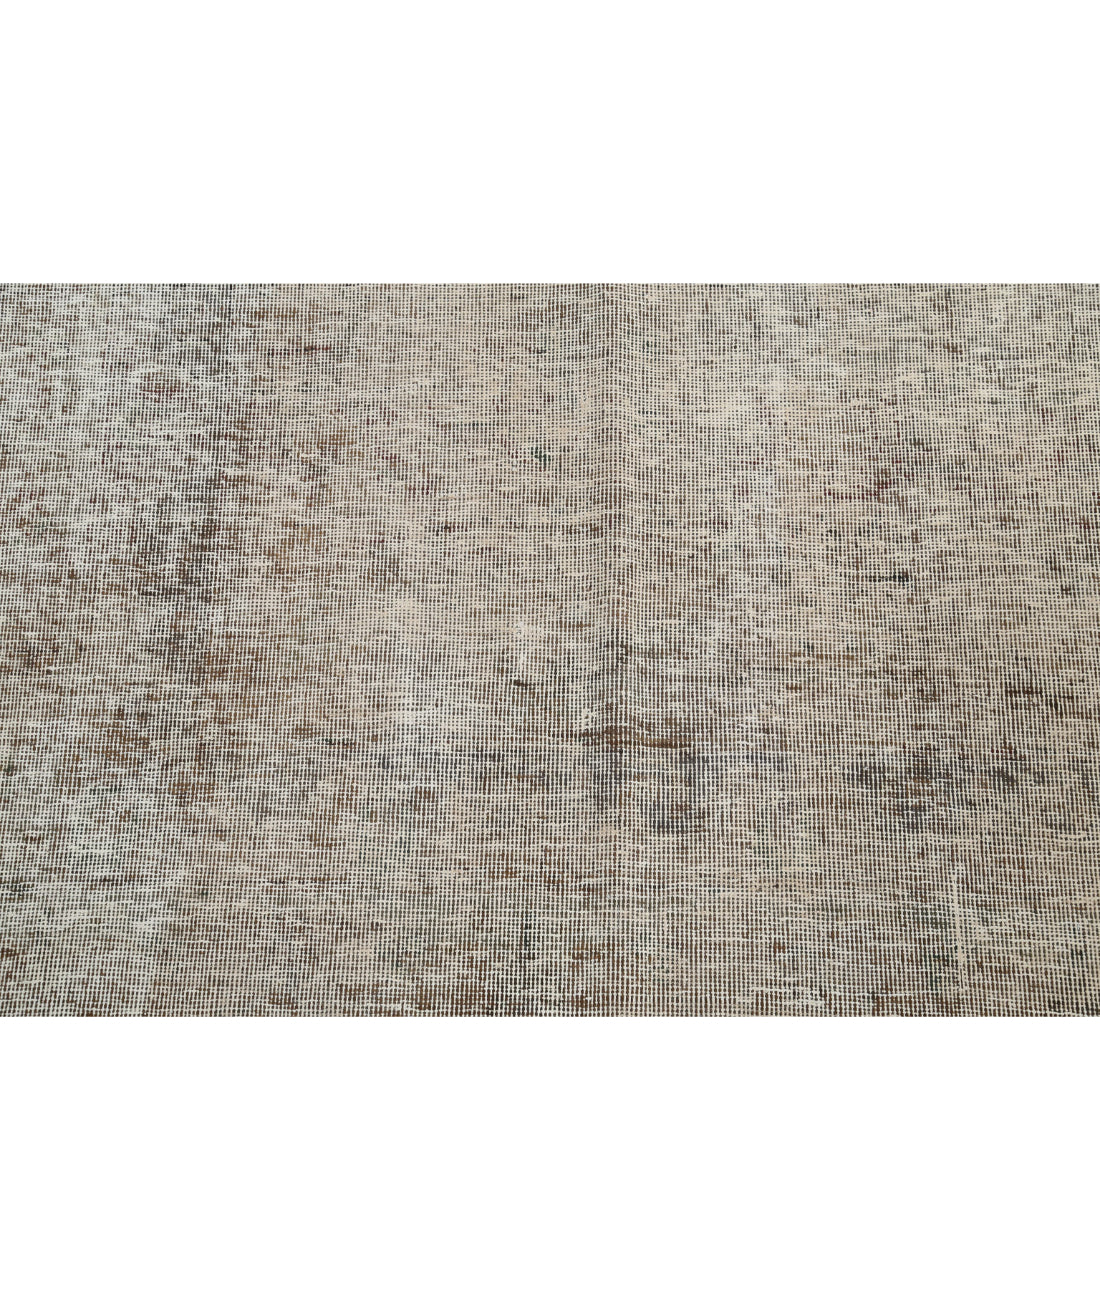 Hand Knotted Vintage Persian Tabriz Wool Rug - 9'1'' x 12'5'' 9'1'' x 12'5'' (273 X 373) / Tan / Ivory